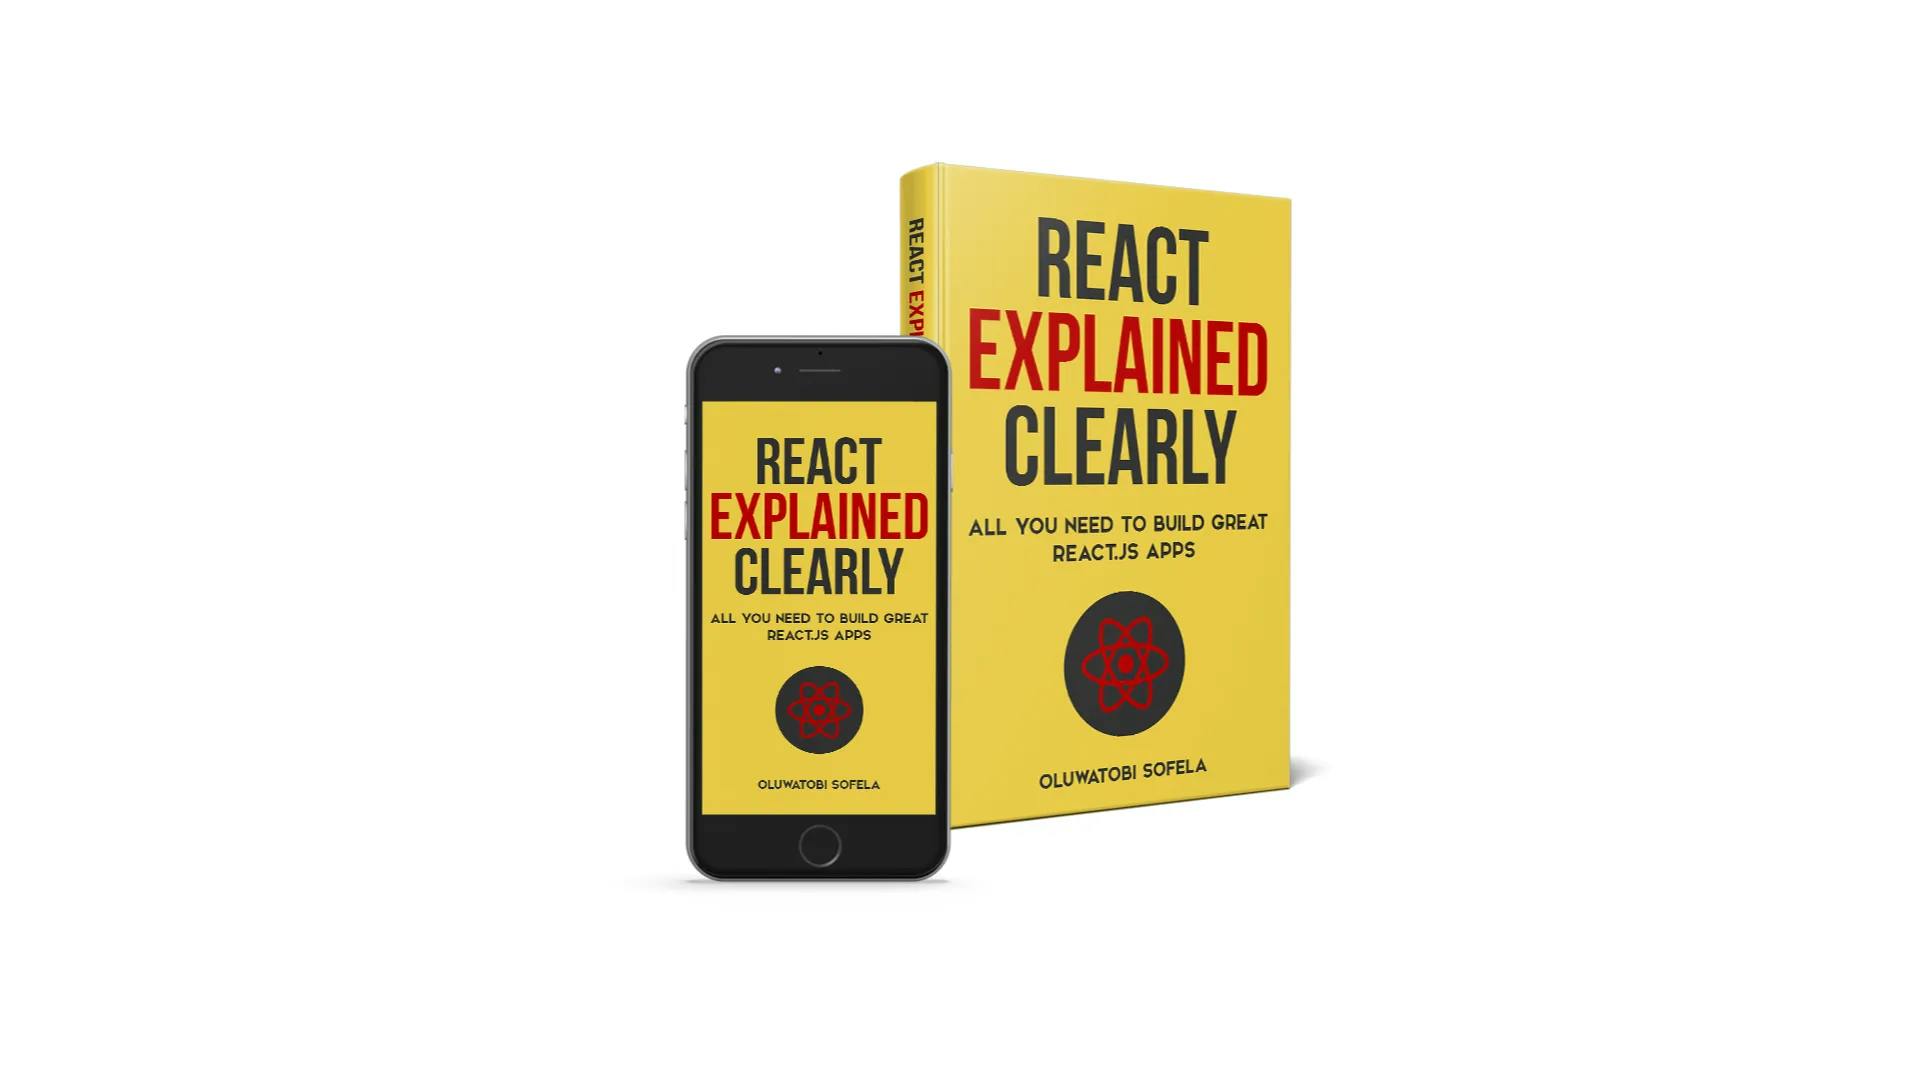 The React Explained Clearly book's image